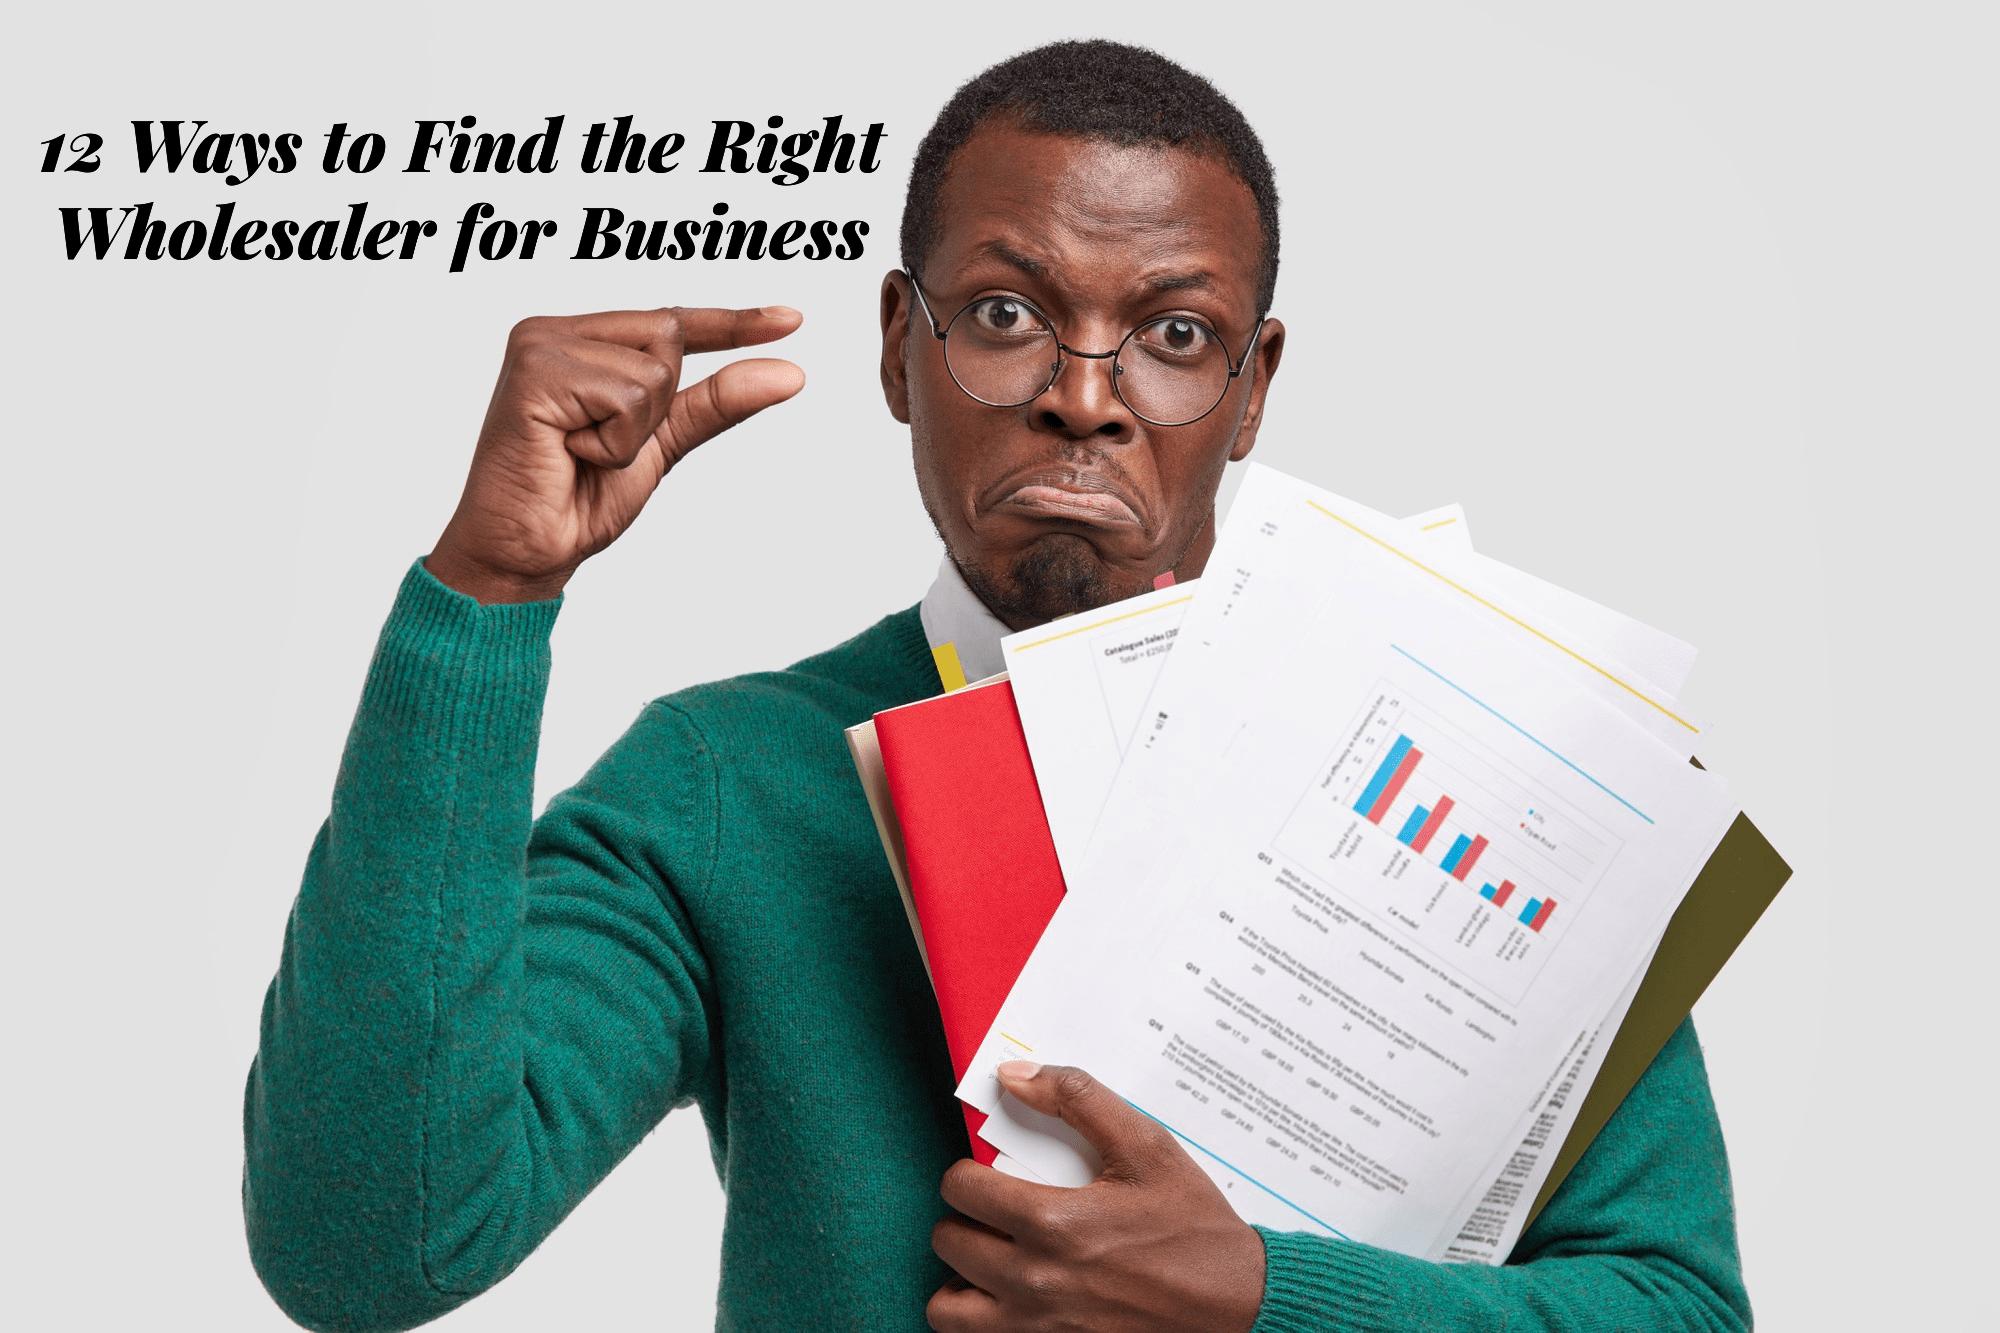 12 Ways to Find the Right Wholesaler for Business